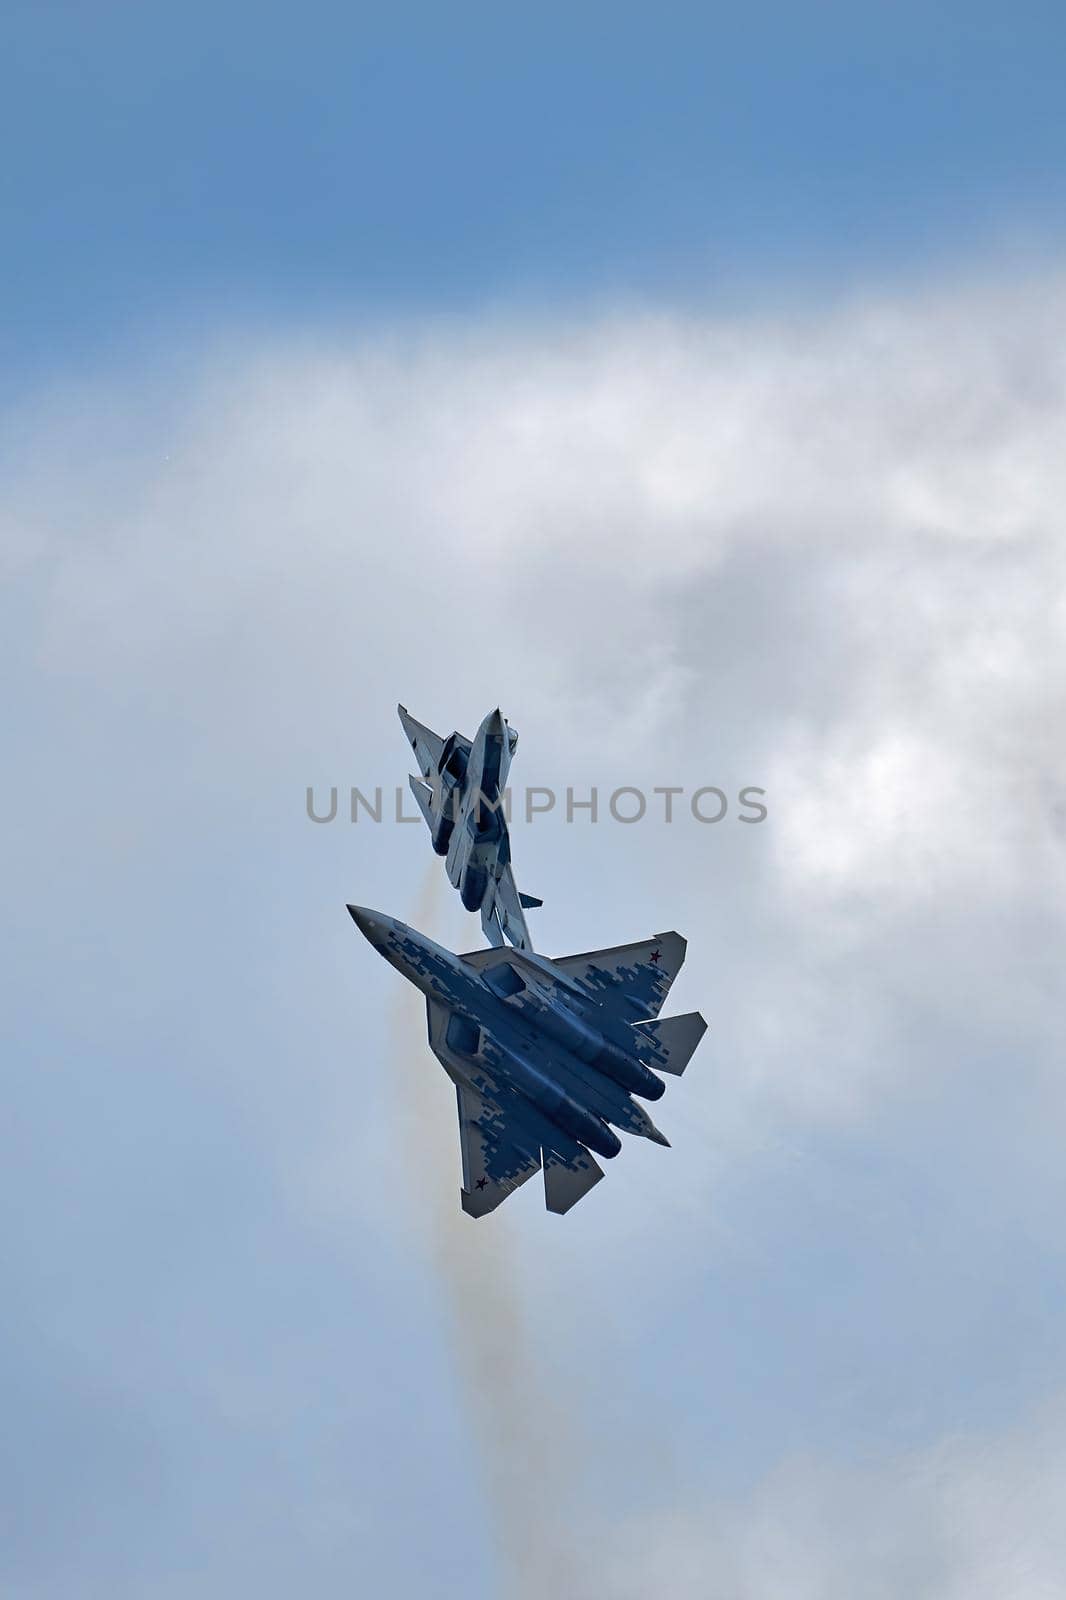 New Russian five generation's fighters SU 57 (T-50) shows aerial maneuver battle at Moscow International Aviation and Space Salon MAKS 2019. RUSSIA, AUGUST 28, 2019.